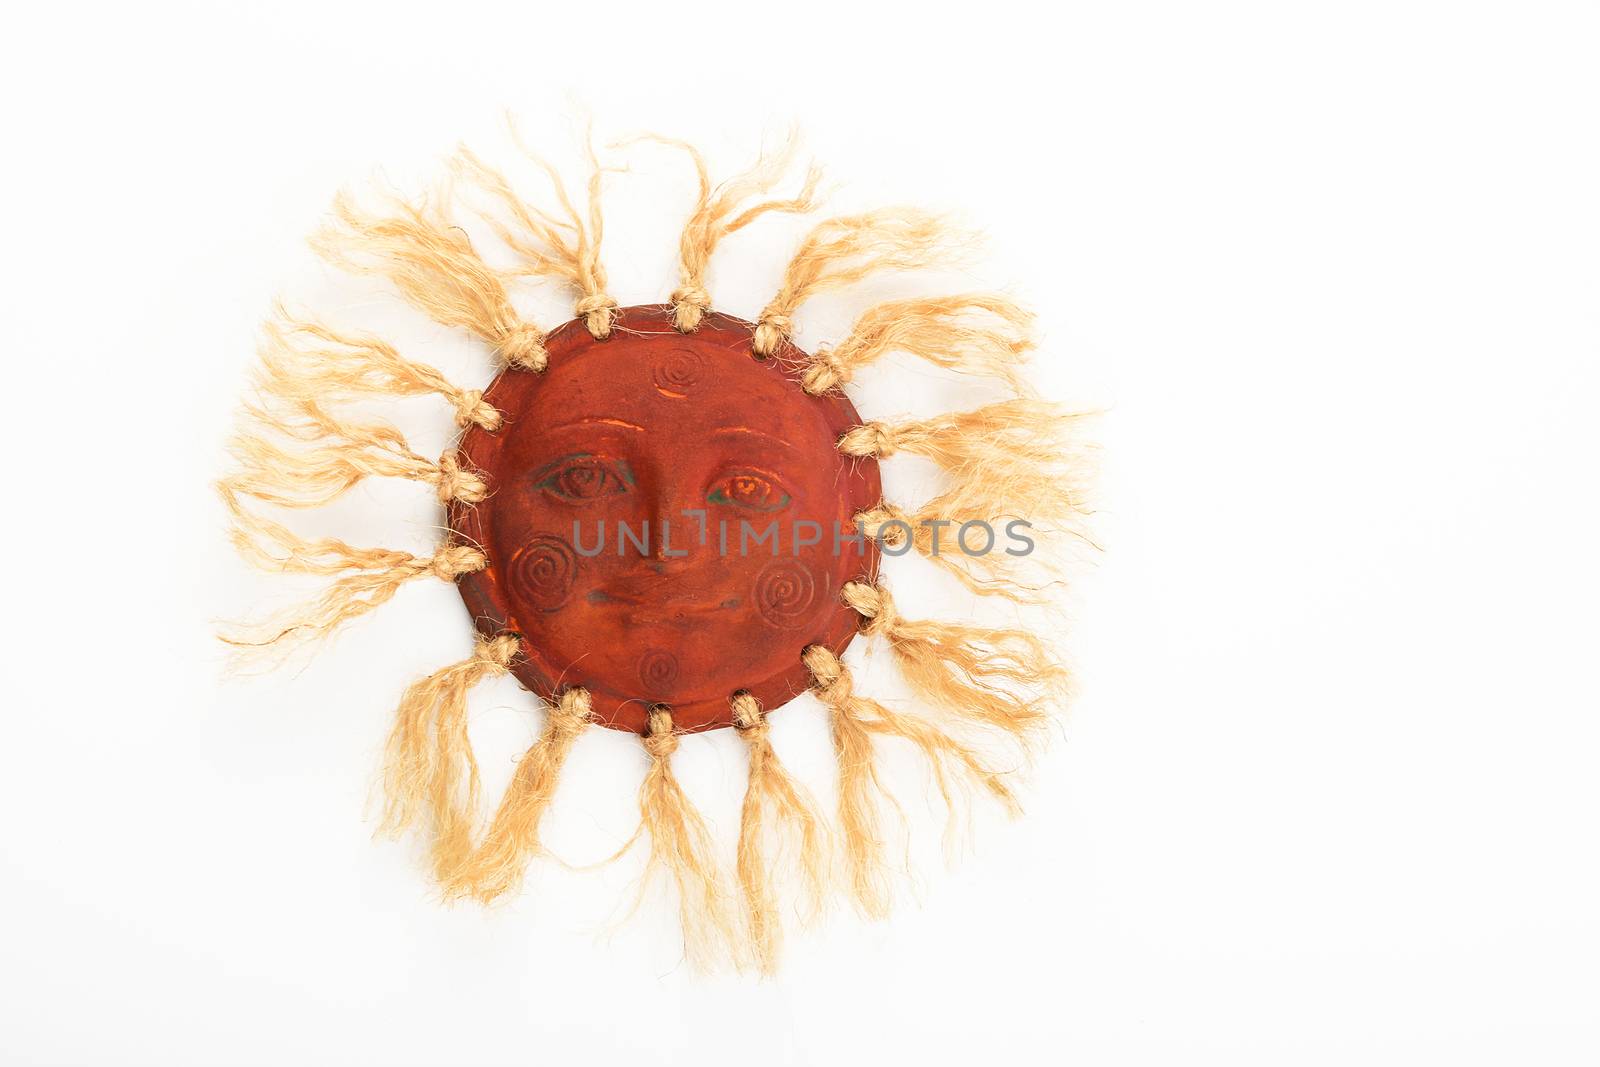 Mexican traditional ceramic happy sun symbol plate isolated on w by BreakingTheWalls